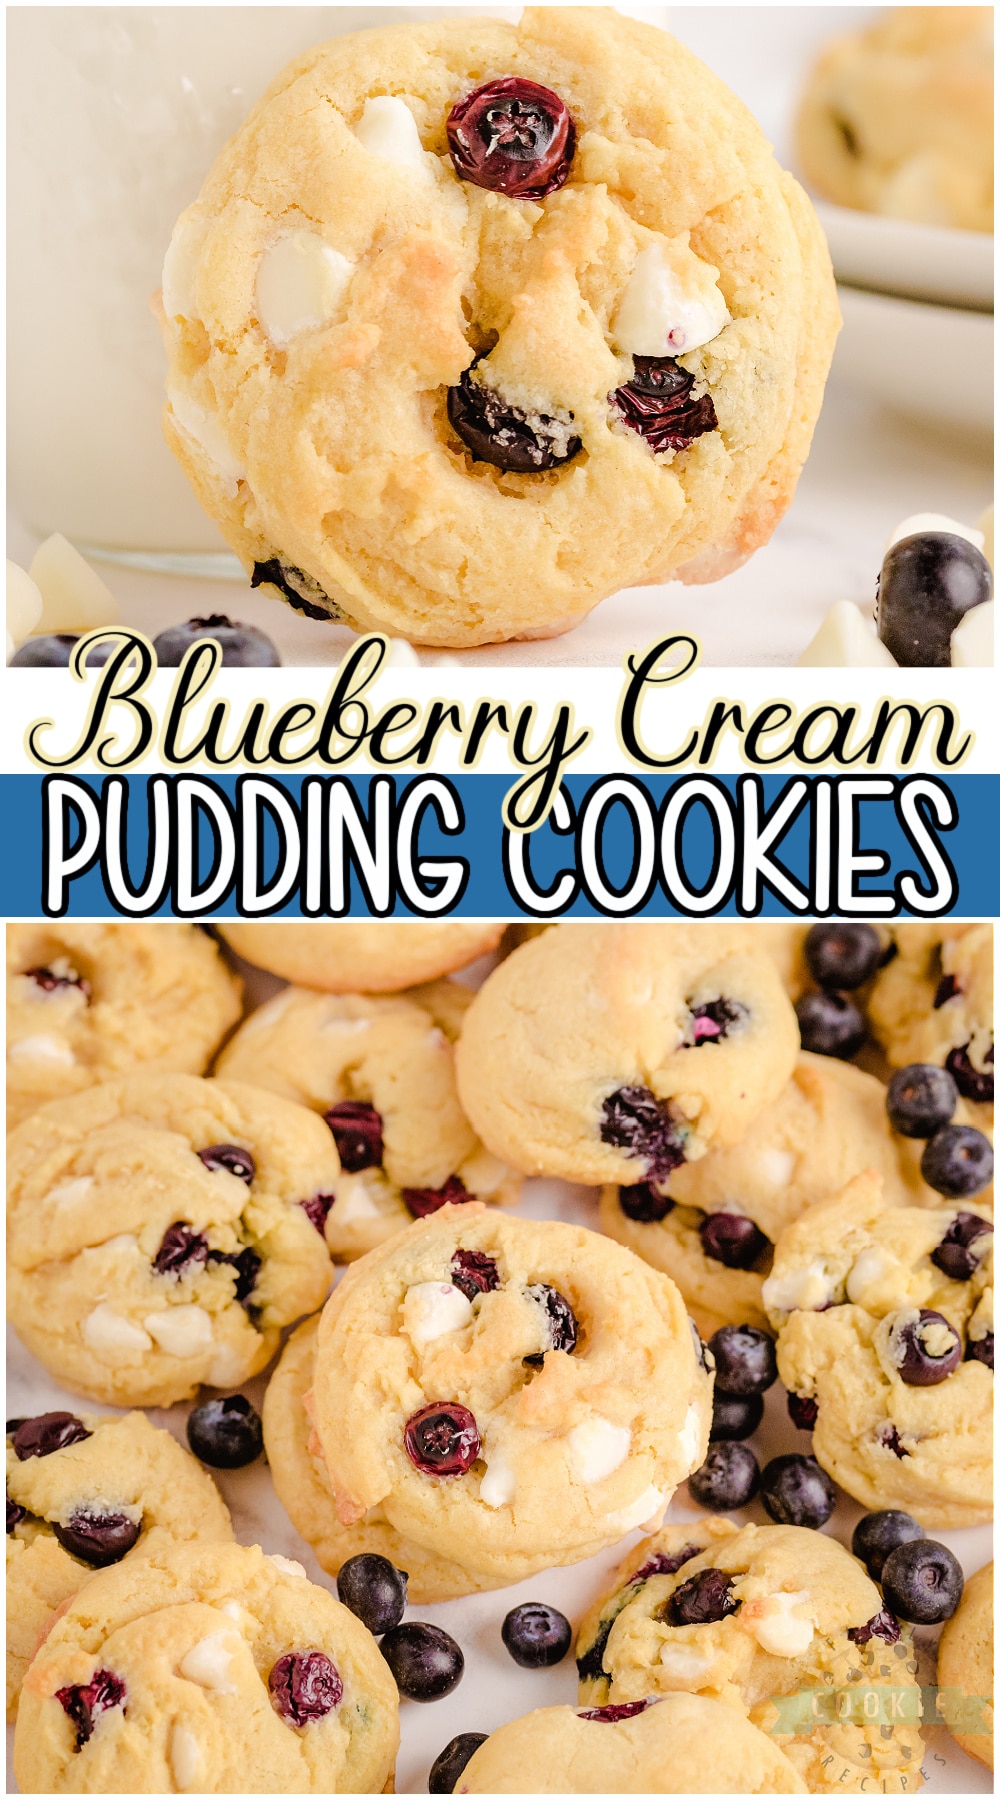 Blueberry Cream Cookies made with fresh blueberries folded into a lovely vanilla pudding cookie dough. Soft pudding cookie recipe with lovely bright, fresh flavor from fresh blueberries and white chocolate chips. #blueberry #baking #cookies #whitechocolate #berries #cookierecipe from FAMILY COOKIE RECIPES via @buttergirls